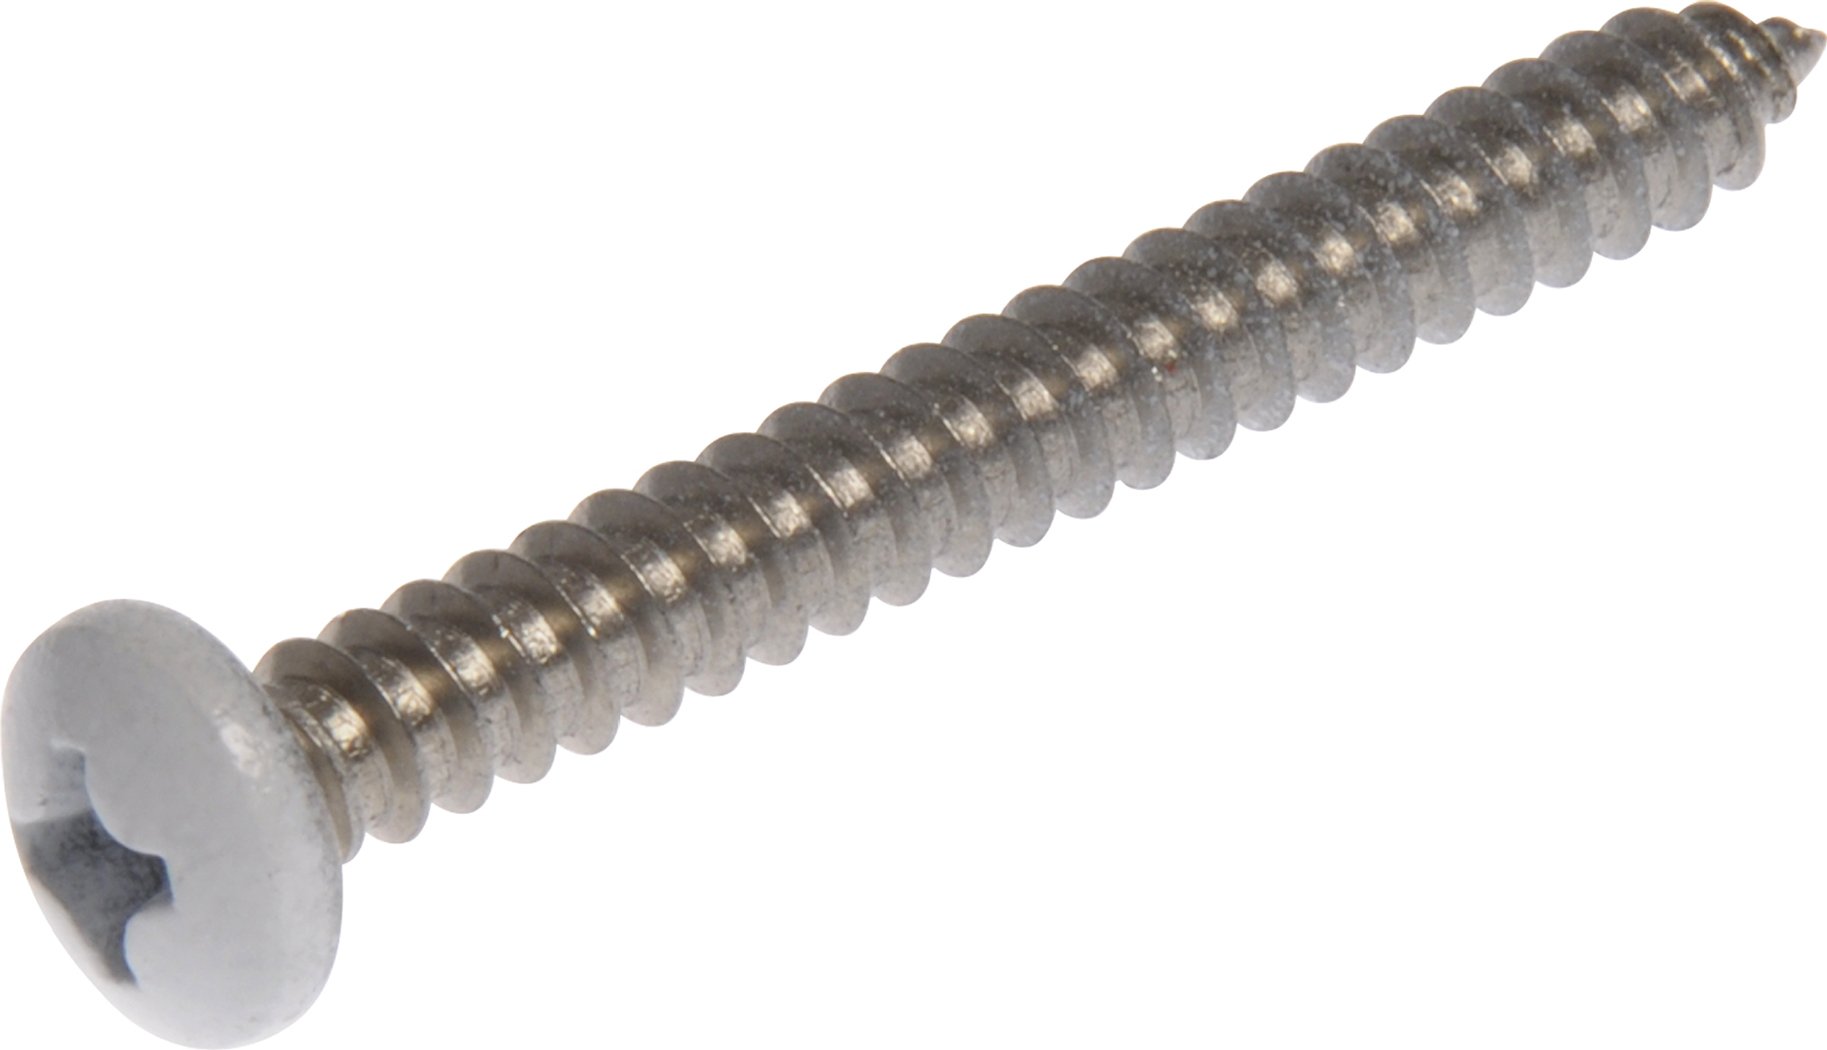 100-Pack The Hillman Group 823268 Stainless Steel Pan Head Phillips Sheet Metal Screw 8 x 1-1/4-Inch 